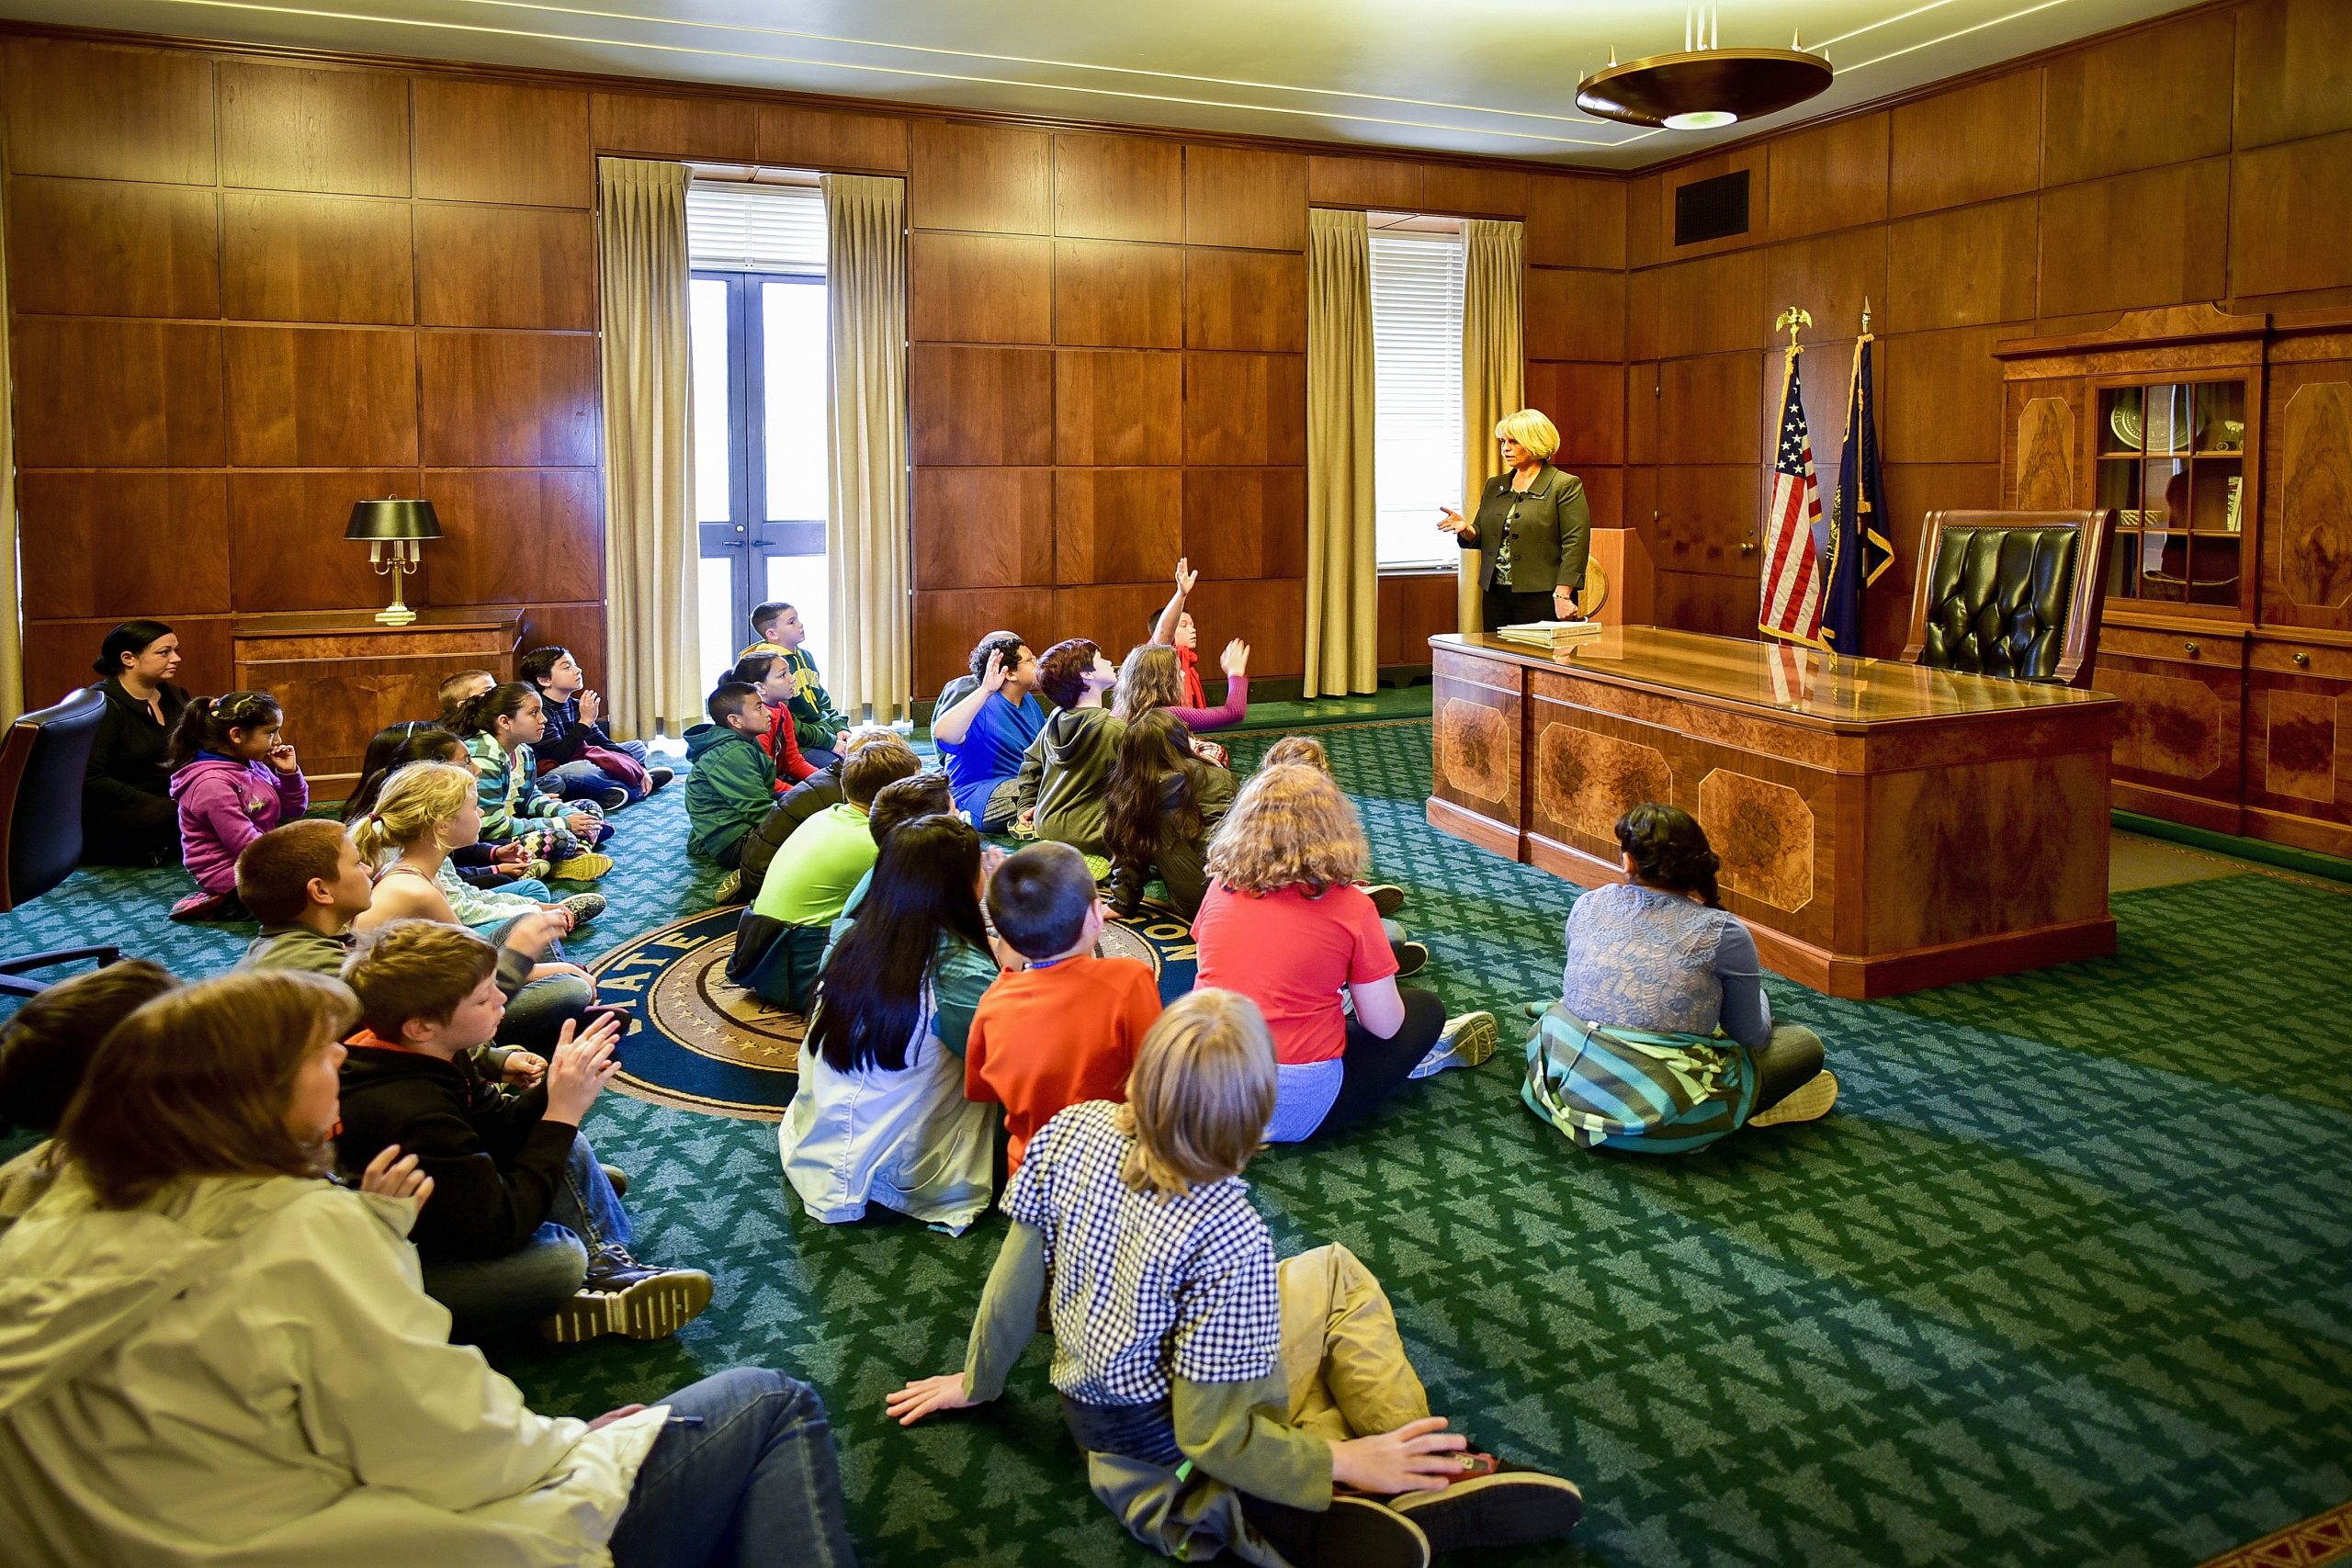 School Children Sit in the Governor's Ceremonial Office During a School Tour